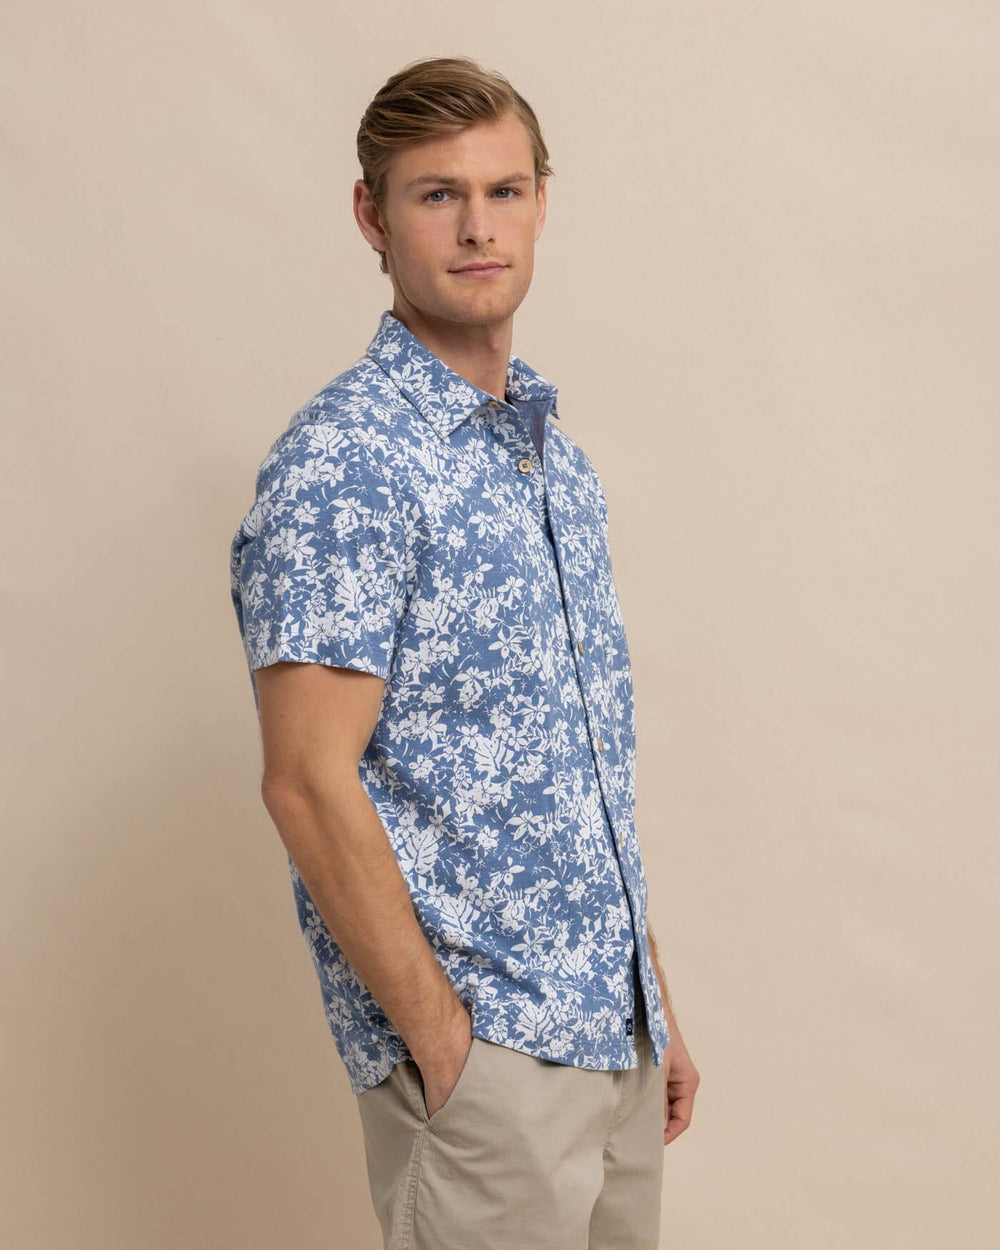 The front view of the Southern Tide Beachcast Island Blooms Knit Short Sleeve Sport Shirt by Southern Tide - Coronet Blue